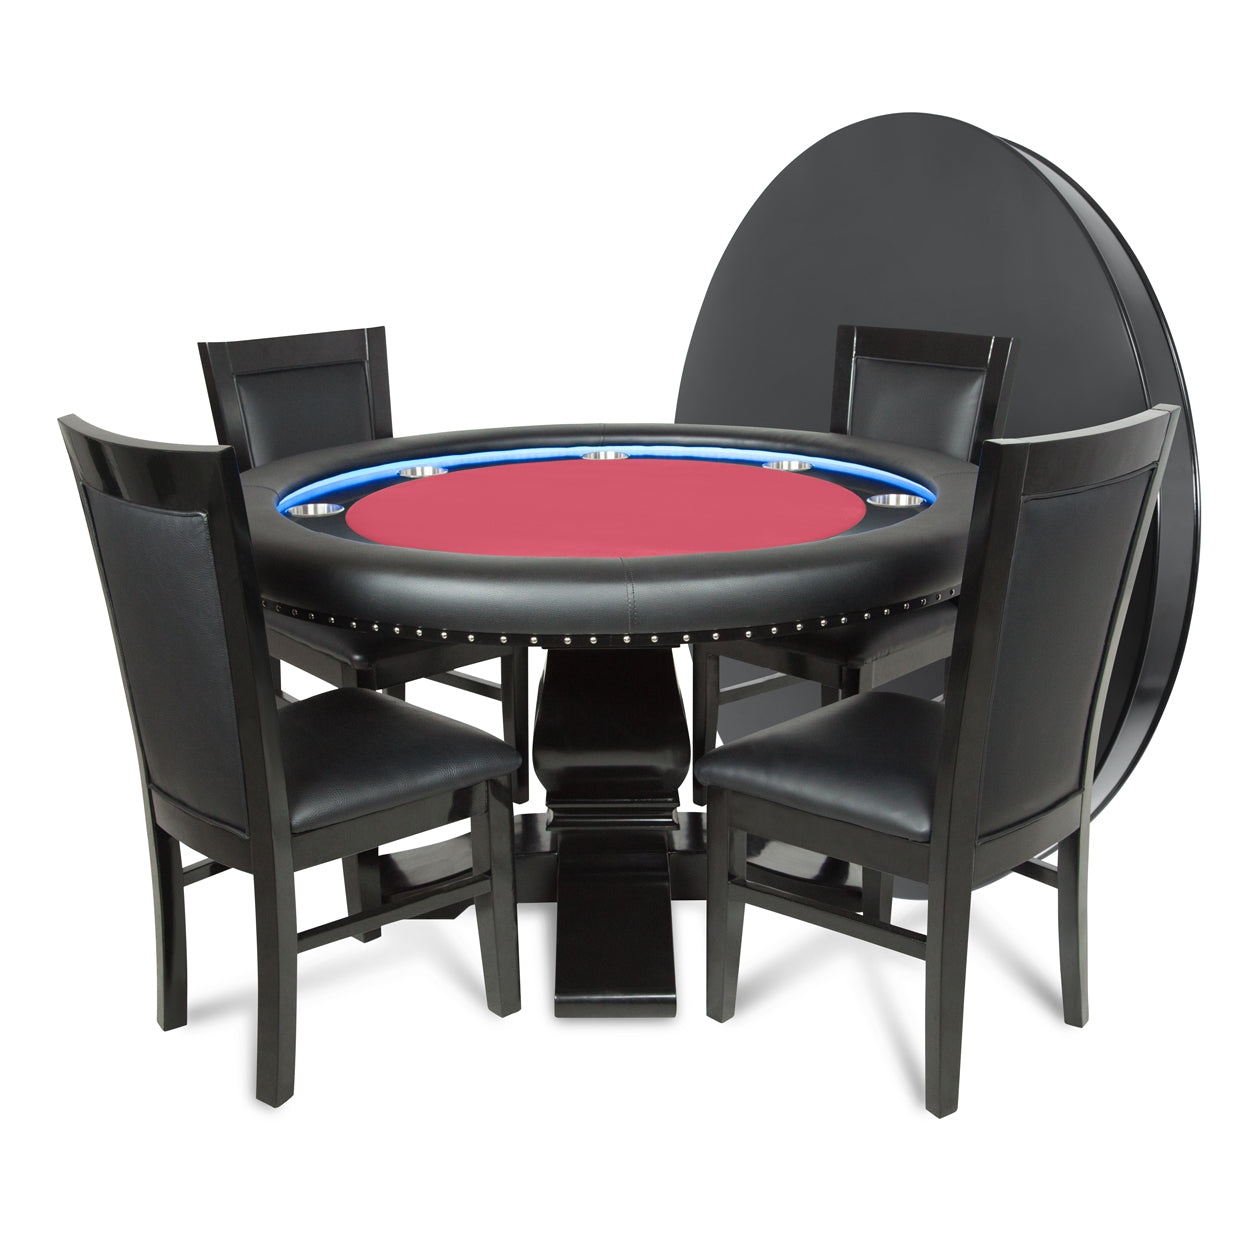 BBO The Ginza LED Premium Poker Table red with dining top and chairs